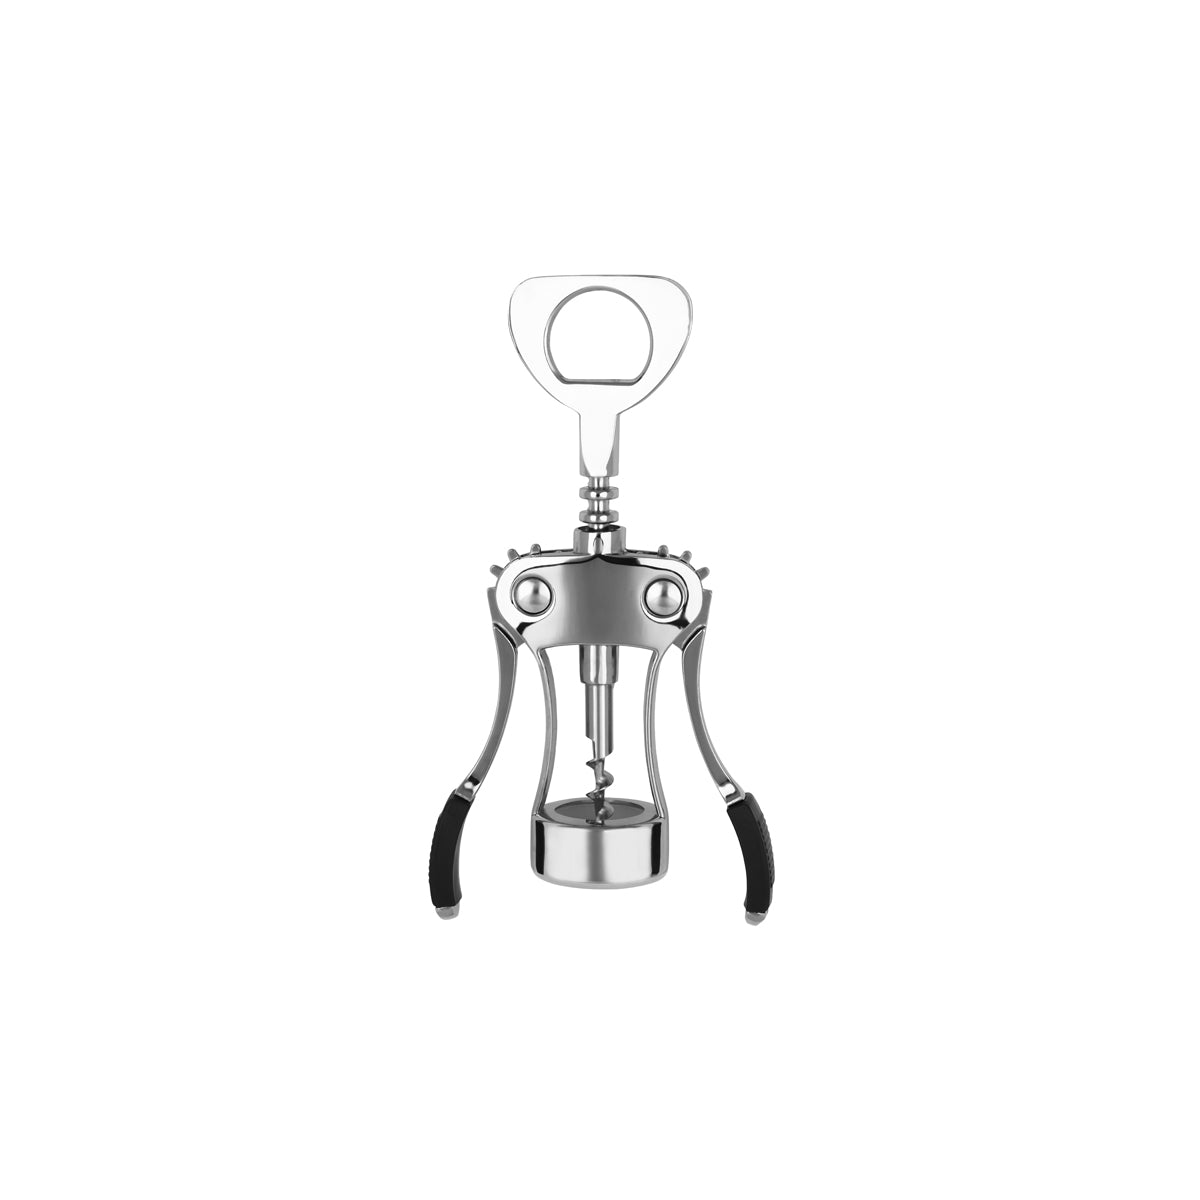 Deluxe Wing Corkscrew Chrome from Zanzi. Packed in a gift box and sold in boxes of 1. Hospitality quality at wholesale price with The Flying Fork! 